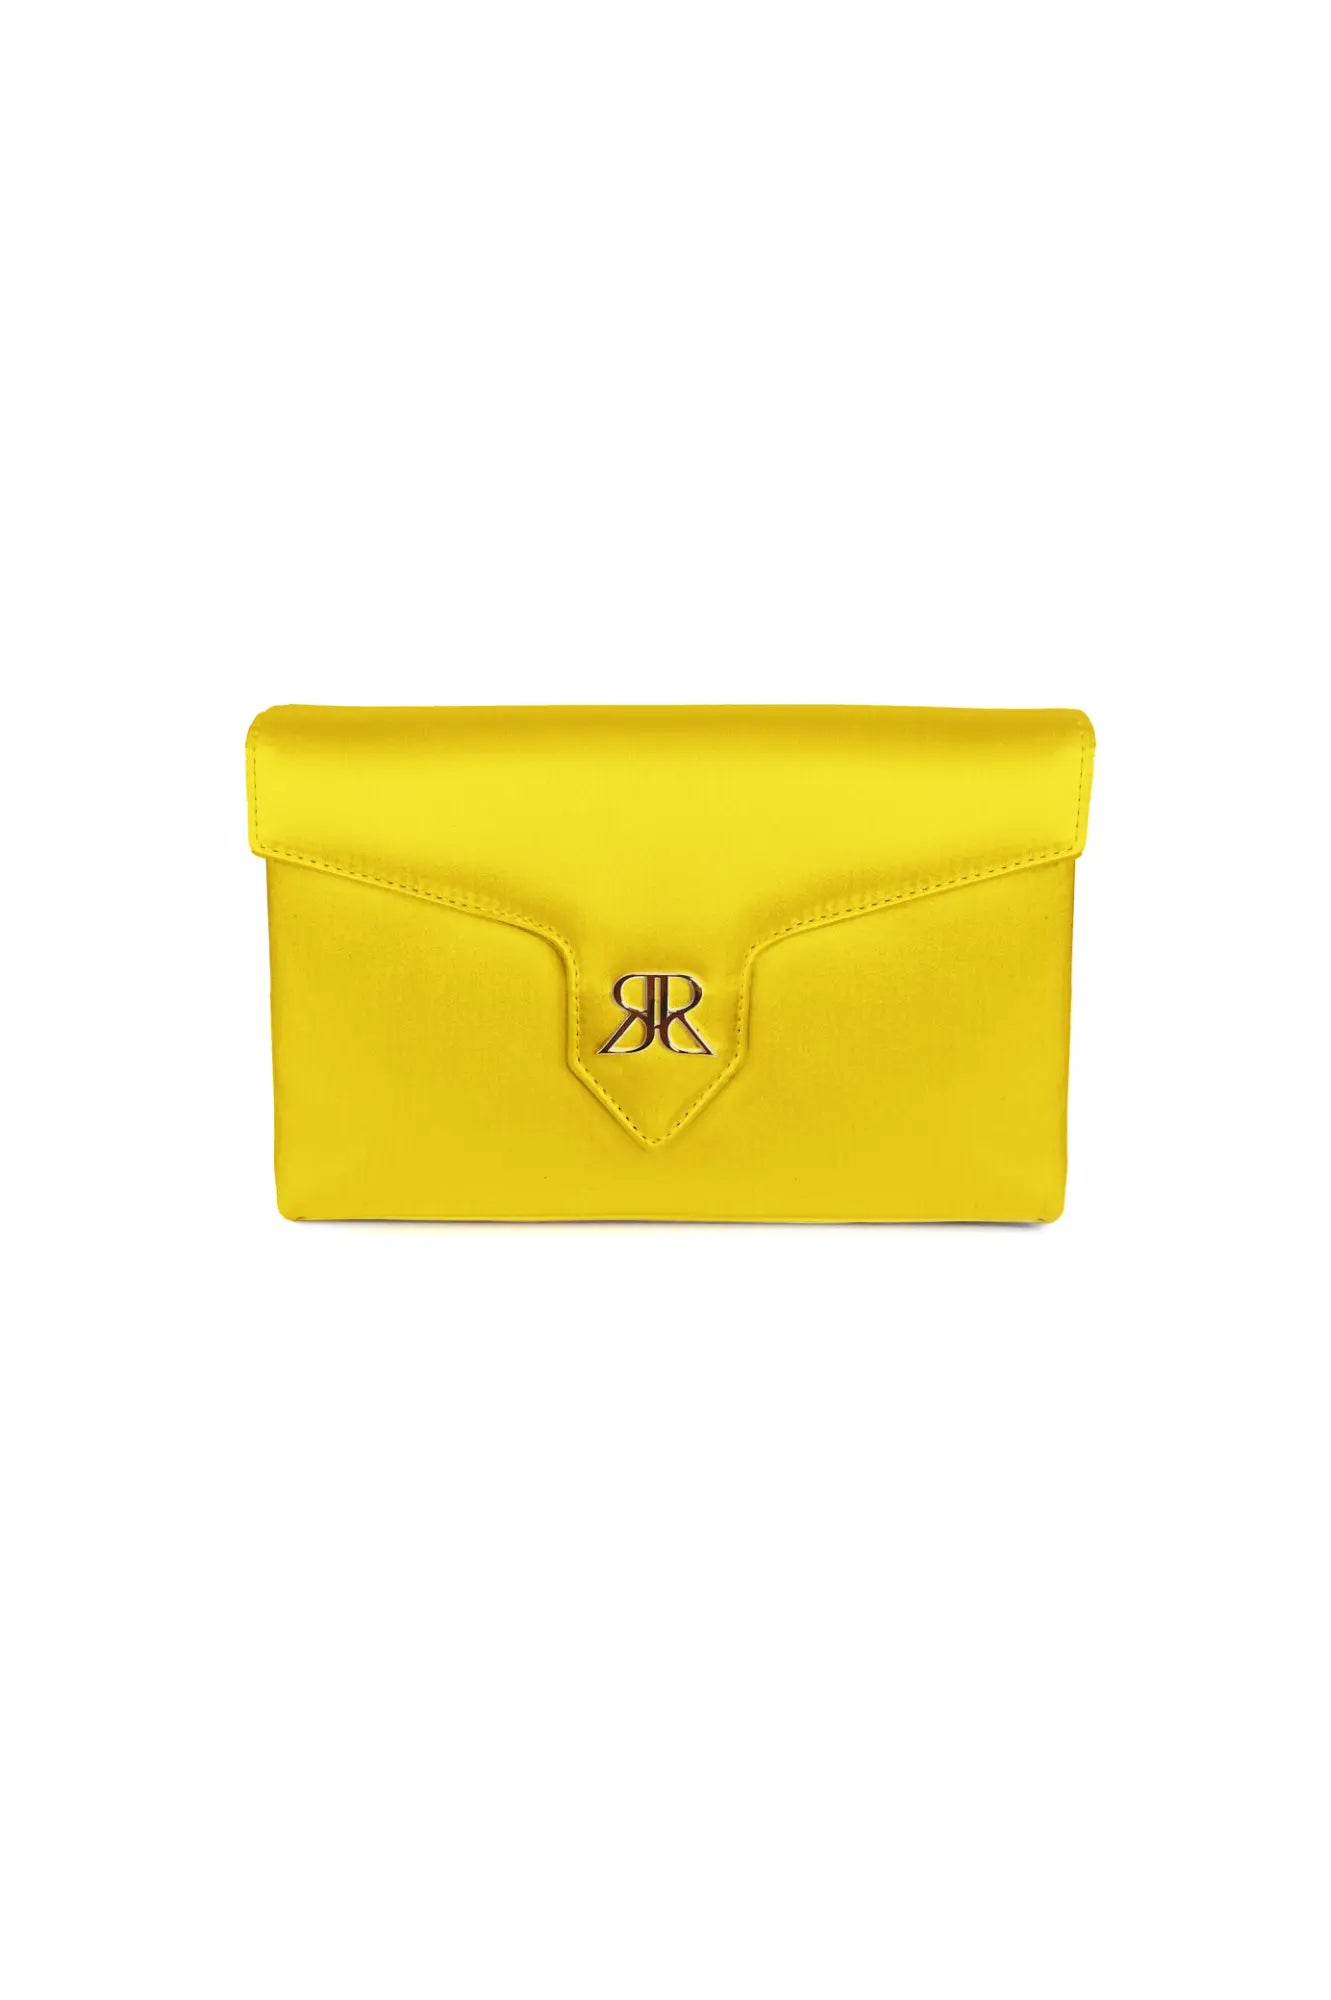 Bright yellow Love Note Envelope Clutch Limoncello Yellow with a metallic emblem on a white background from The Bella Rosa Collection.